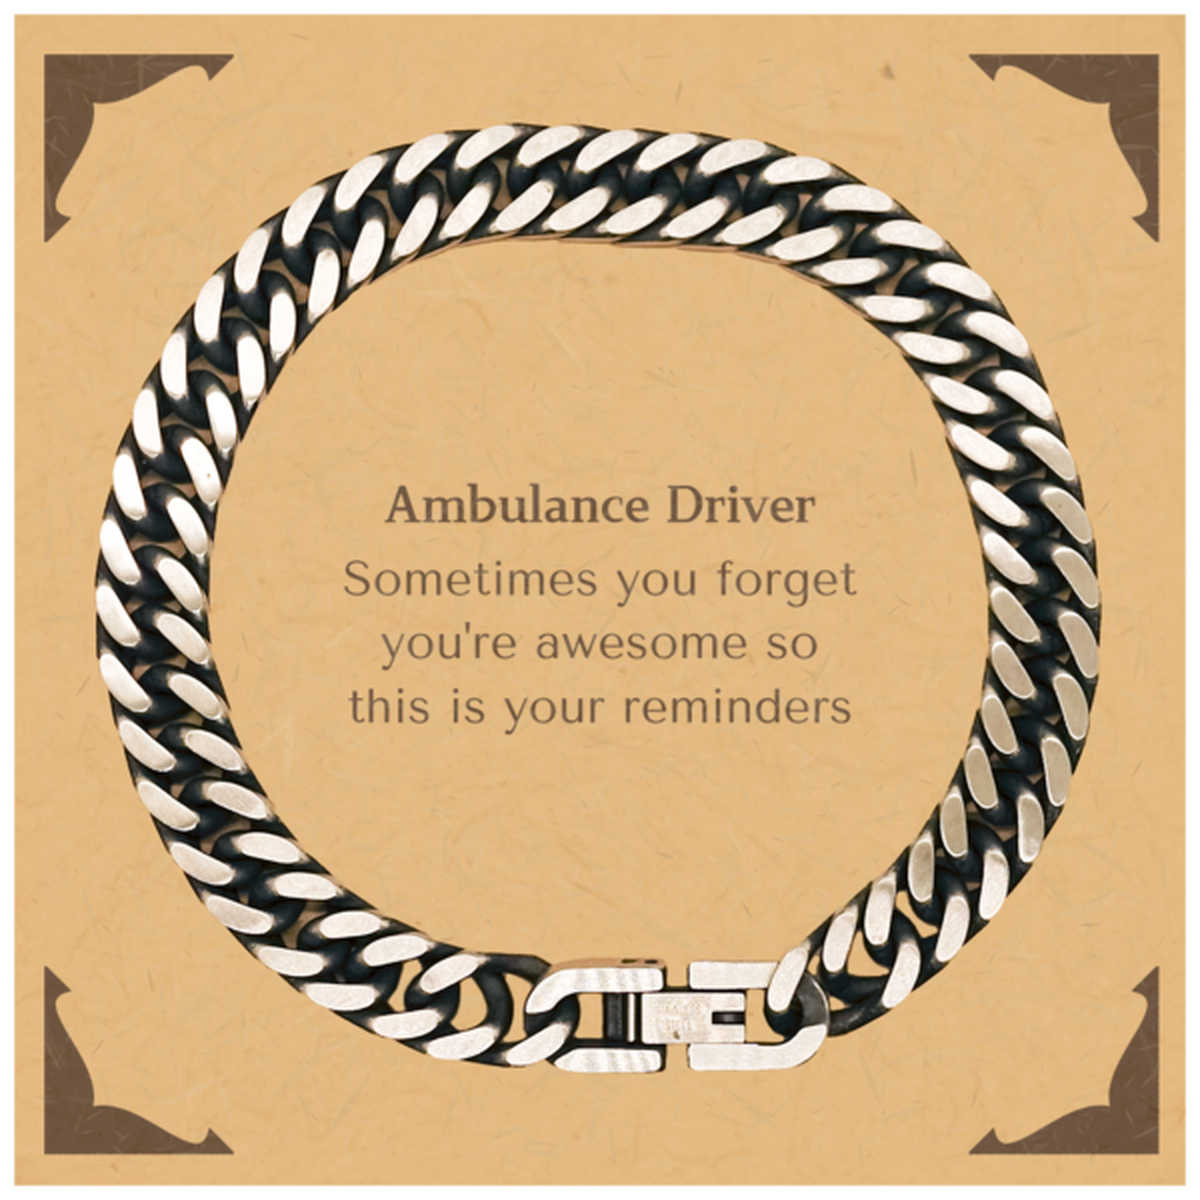 Sentimental Ambulance Driver Cuban Link Chain Bracelet, Ambulance Driver Sometimes you forget you're awesome so this is your reminders, Graduation Christmas Birthday Gifts for Ambulance Driver, Men, Women, Coworkers